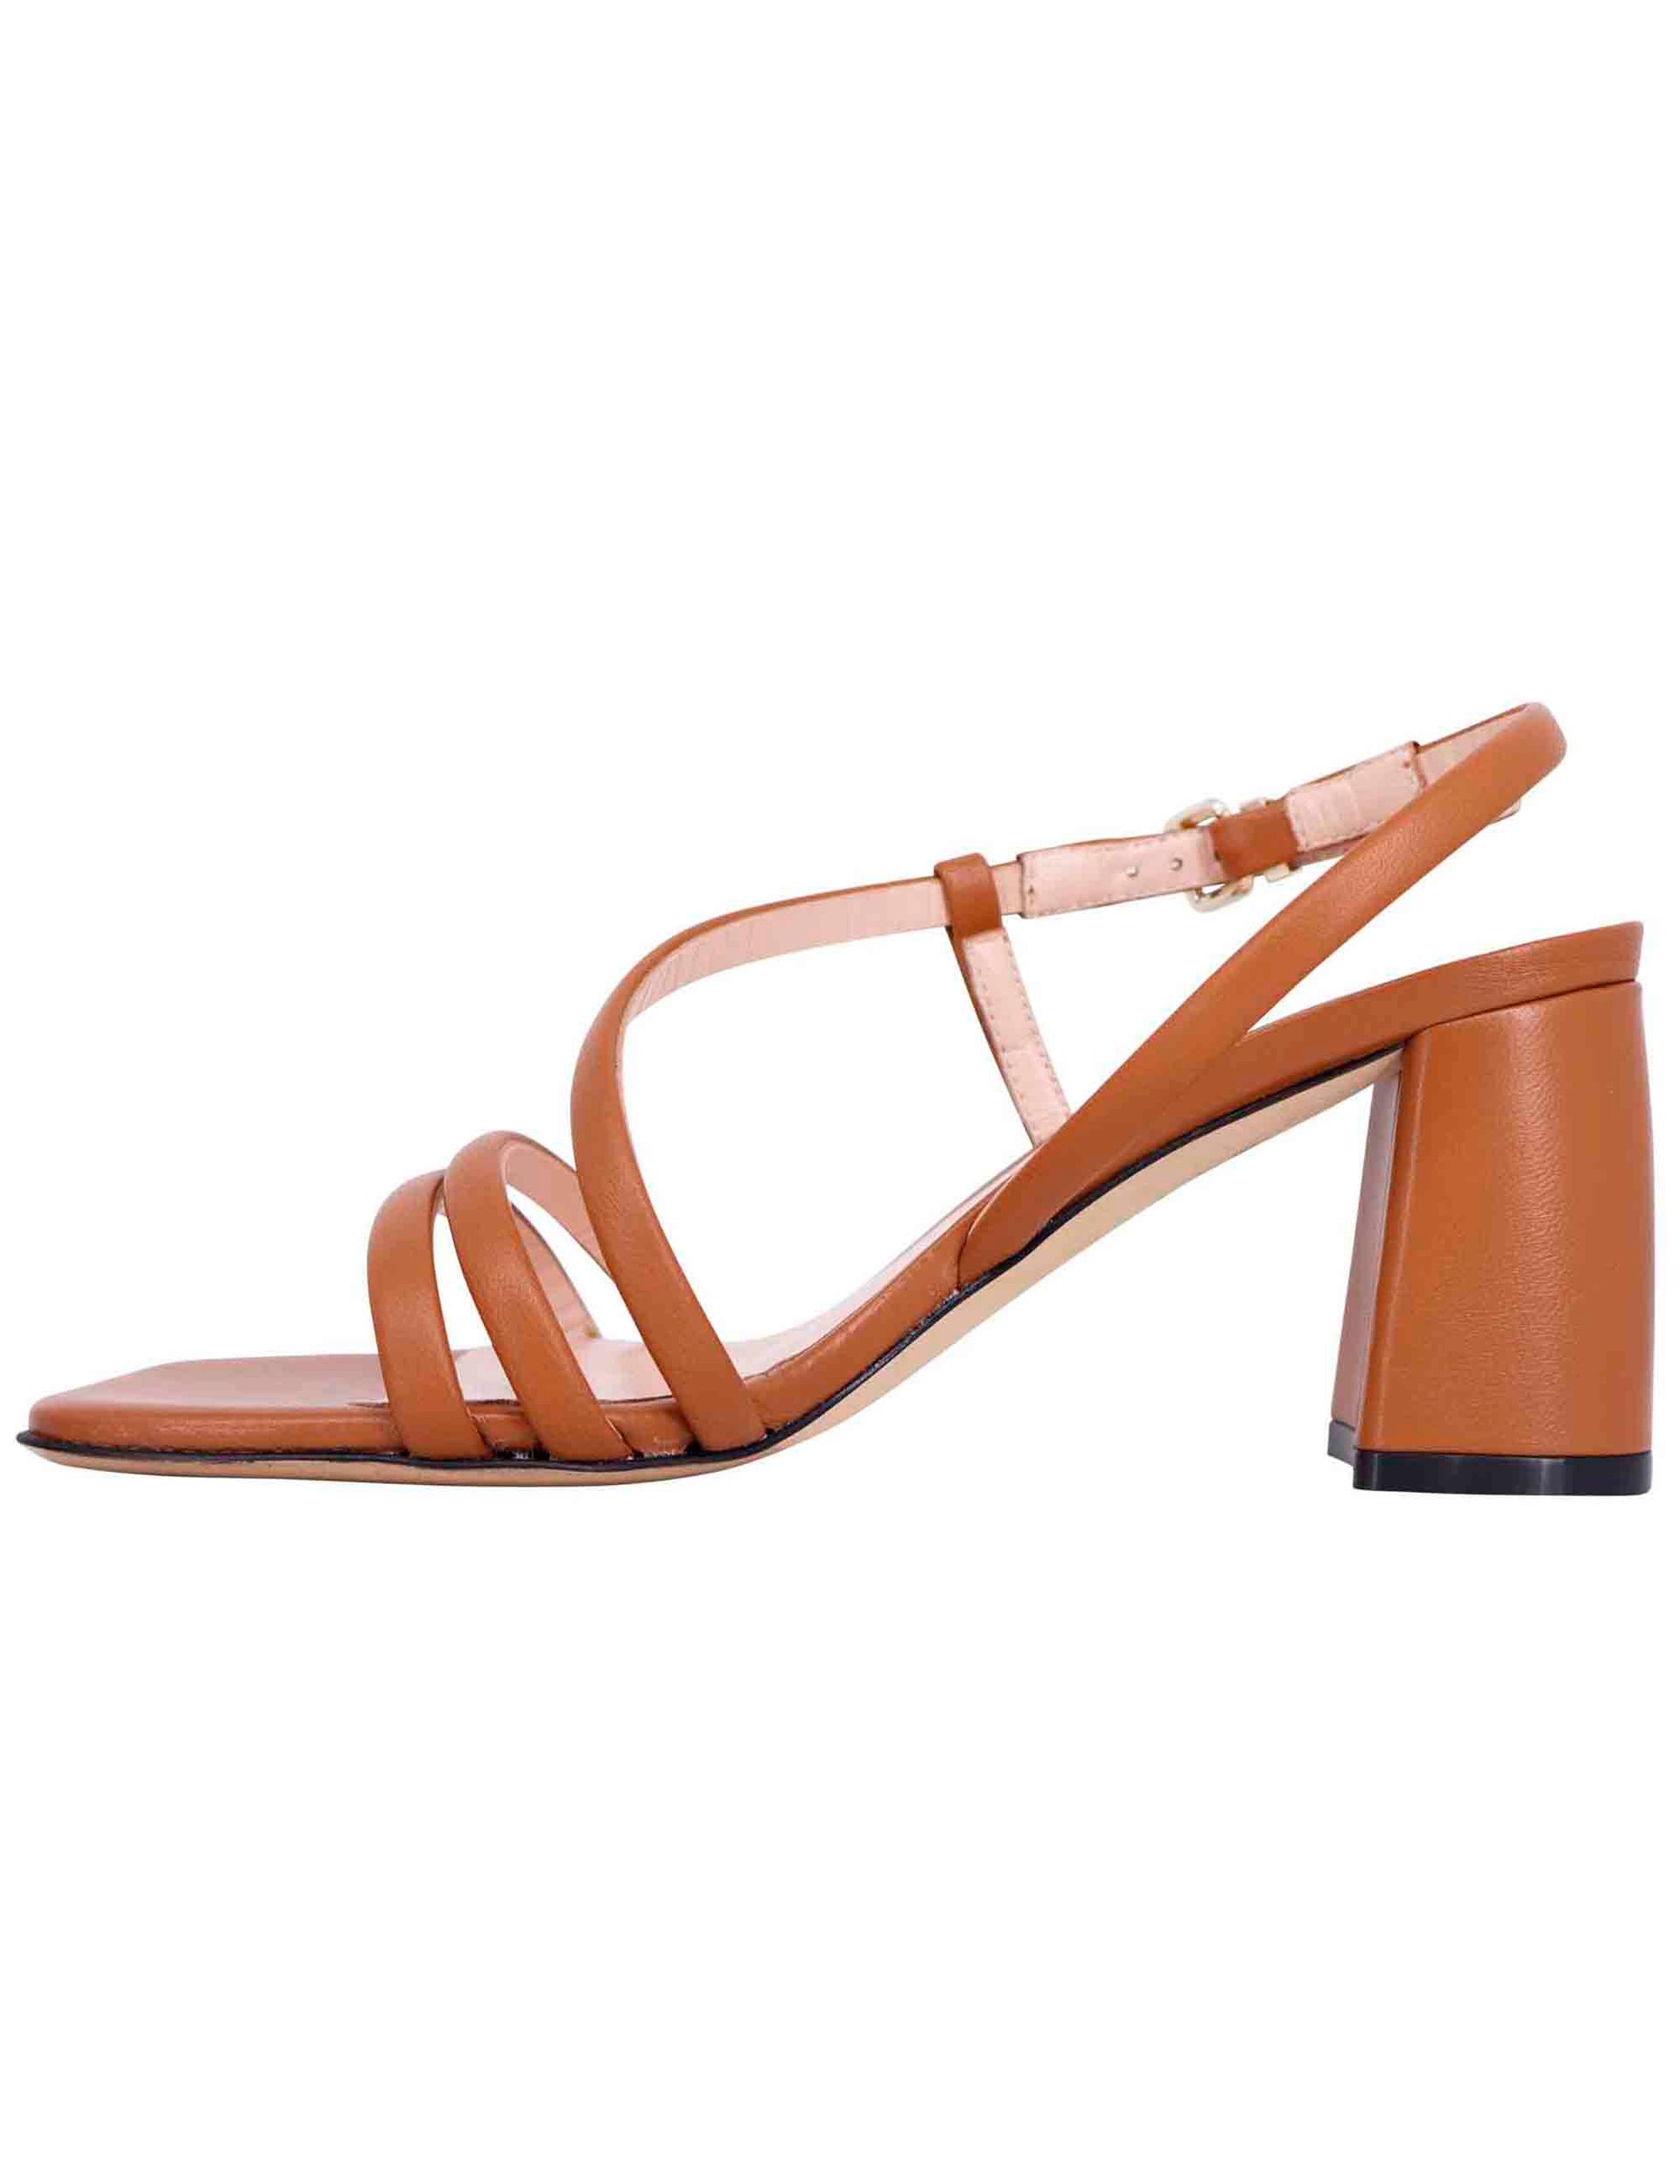 Women's slingback sandals in tan leather with chunky heel and square toe